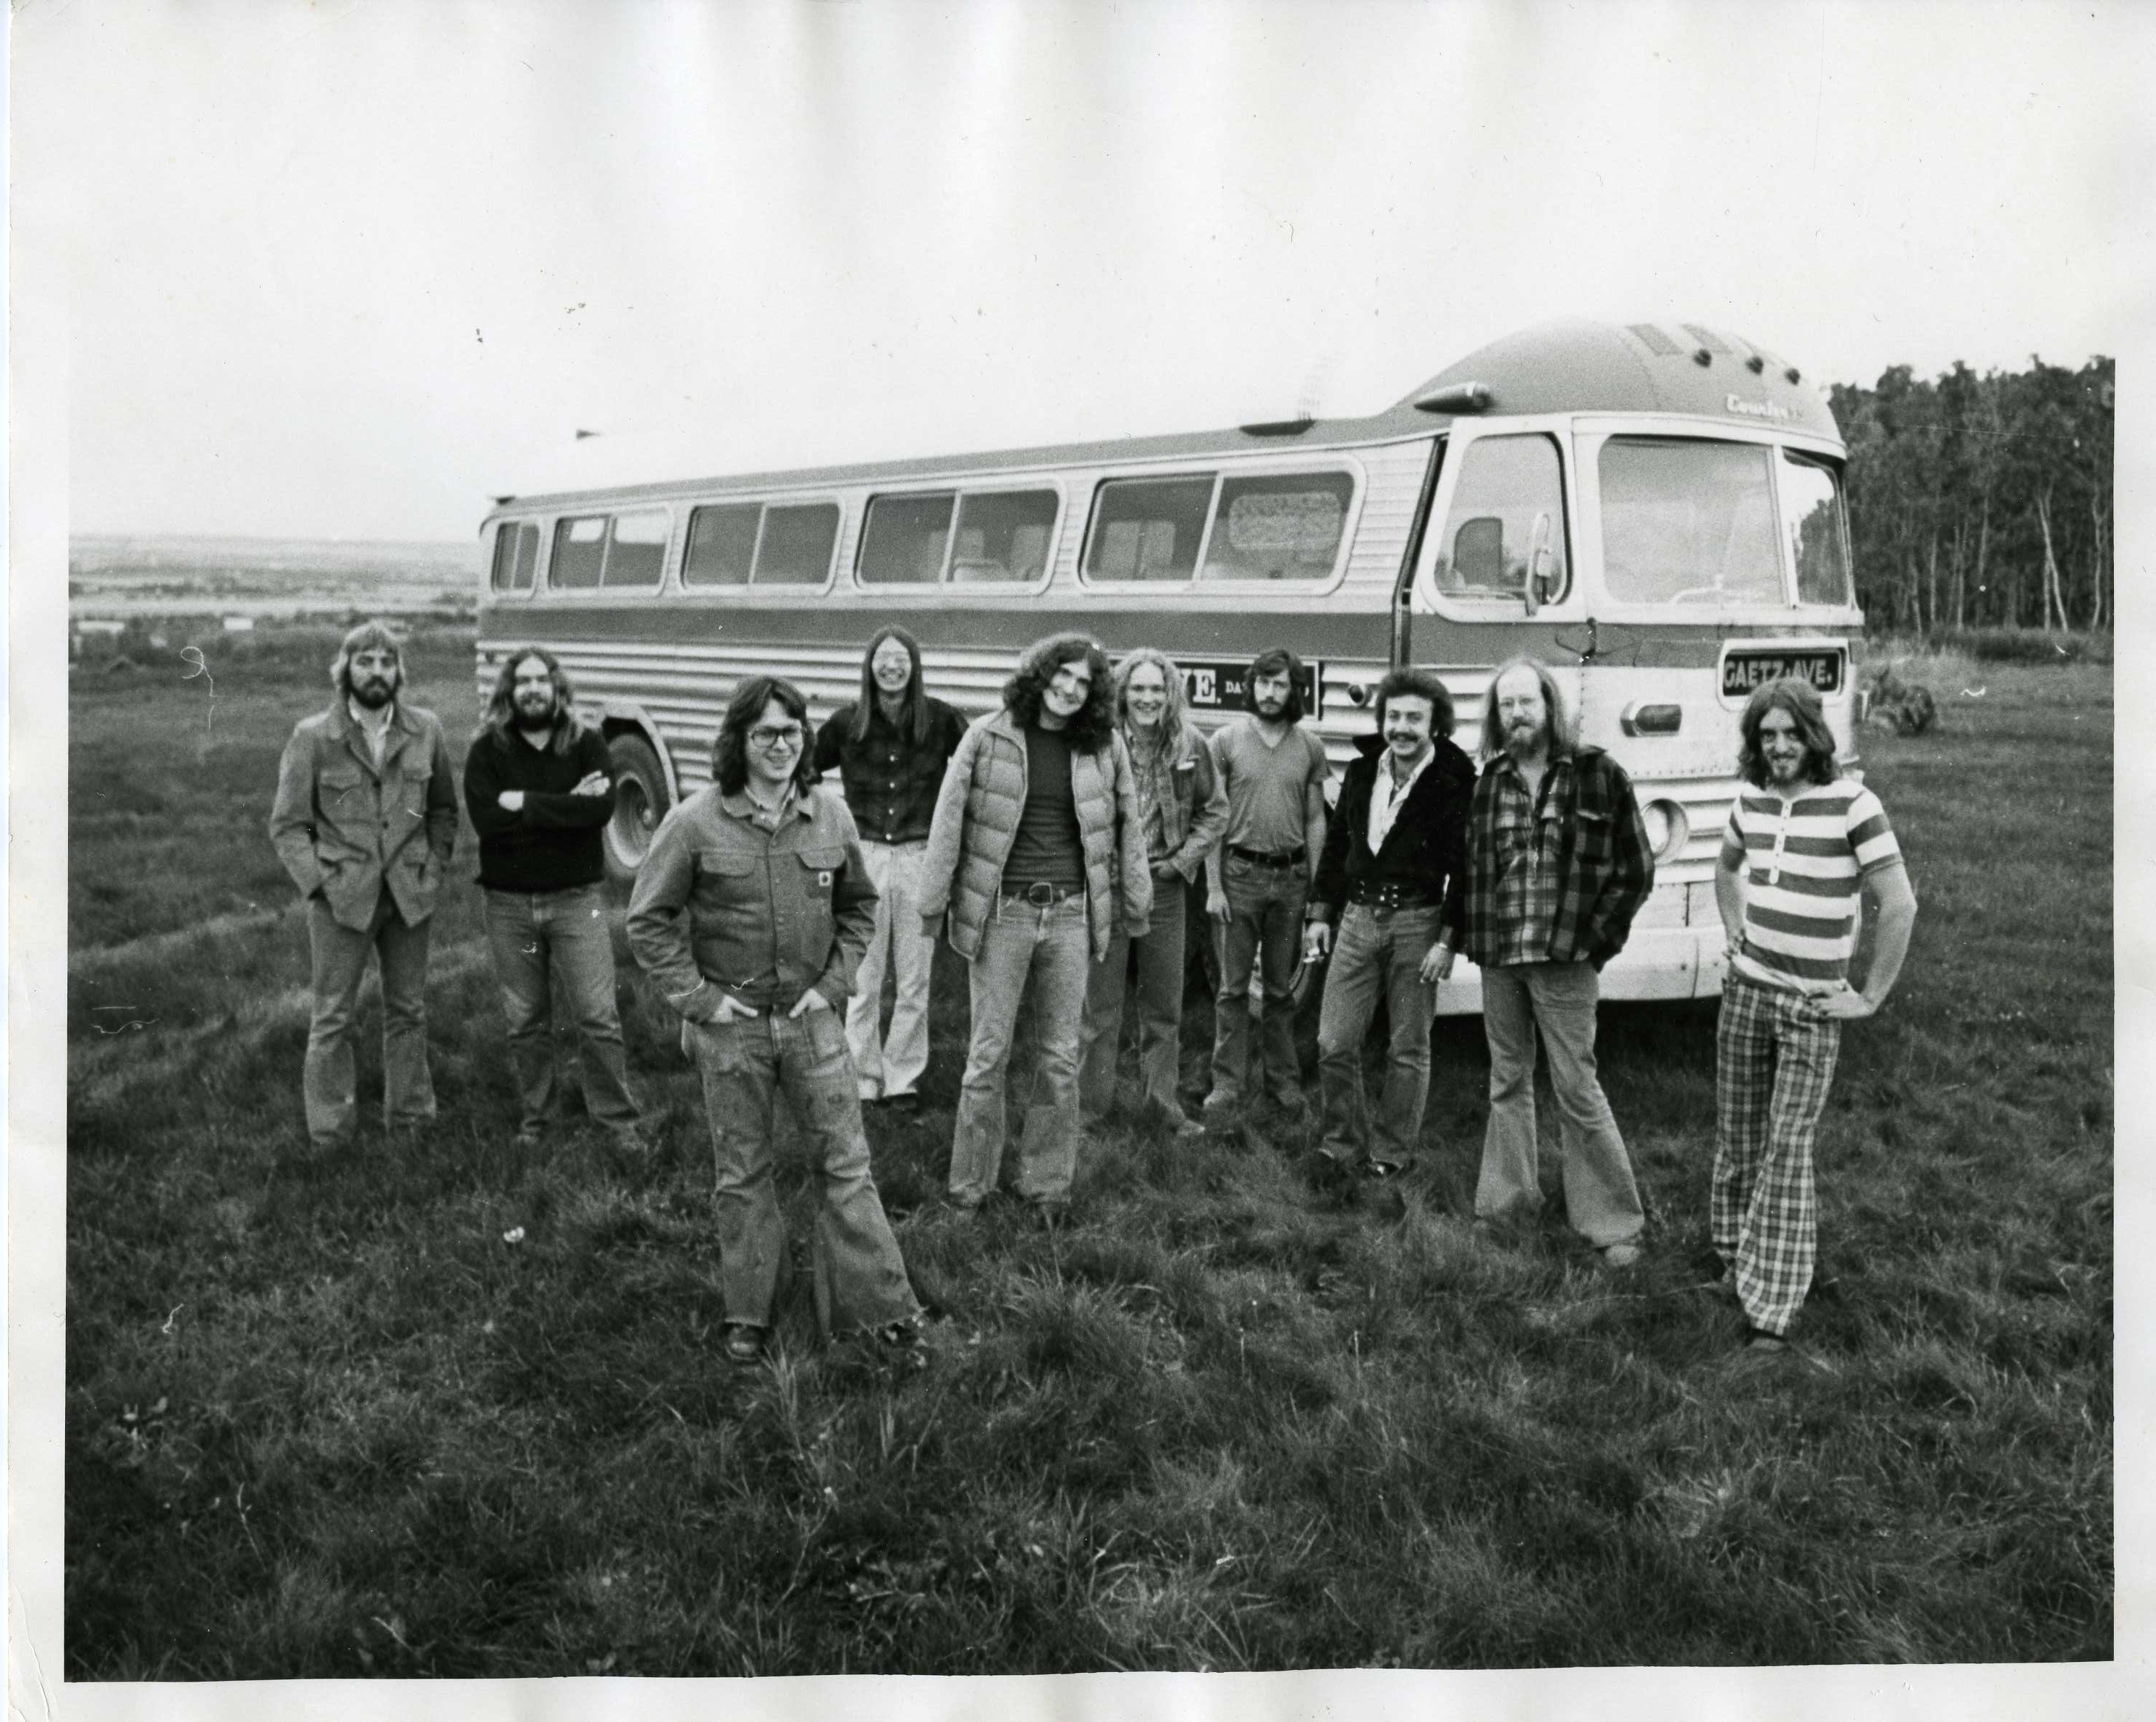 CLASSIC- Pictured here is the Gaetz Avenue Dance Band in about 1973. They were one of several local bands in that era that will be included in an upcoming exhibit at the Red Deer Museum + Art Gallery. Organizers are looking for other bands to provide information and memorabilia about the local music scene from 1960 to 1975. Pictured are